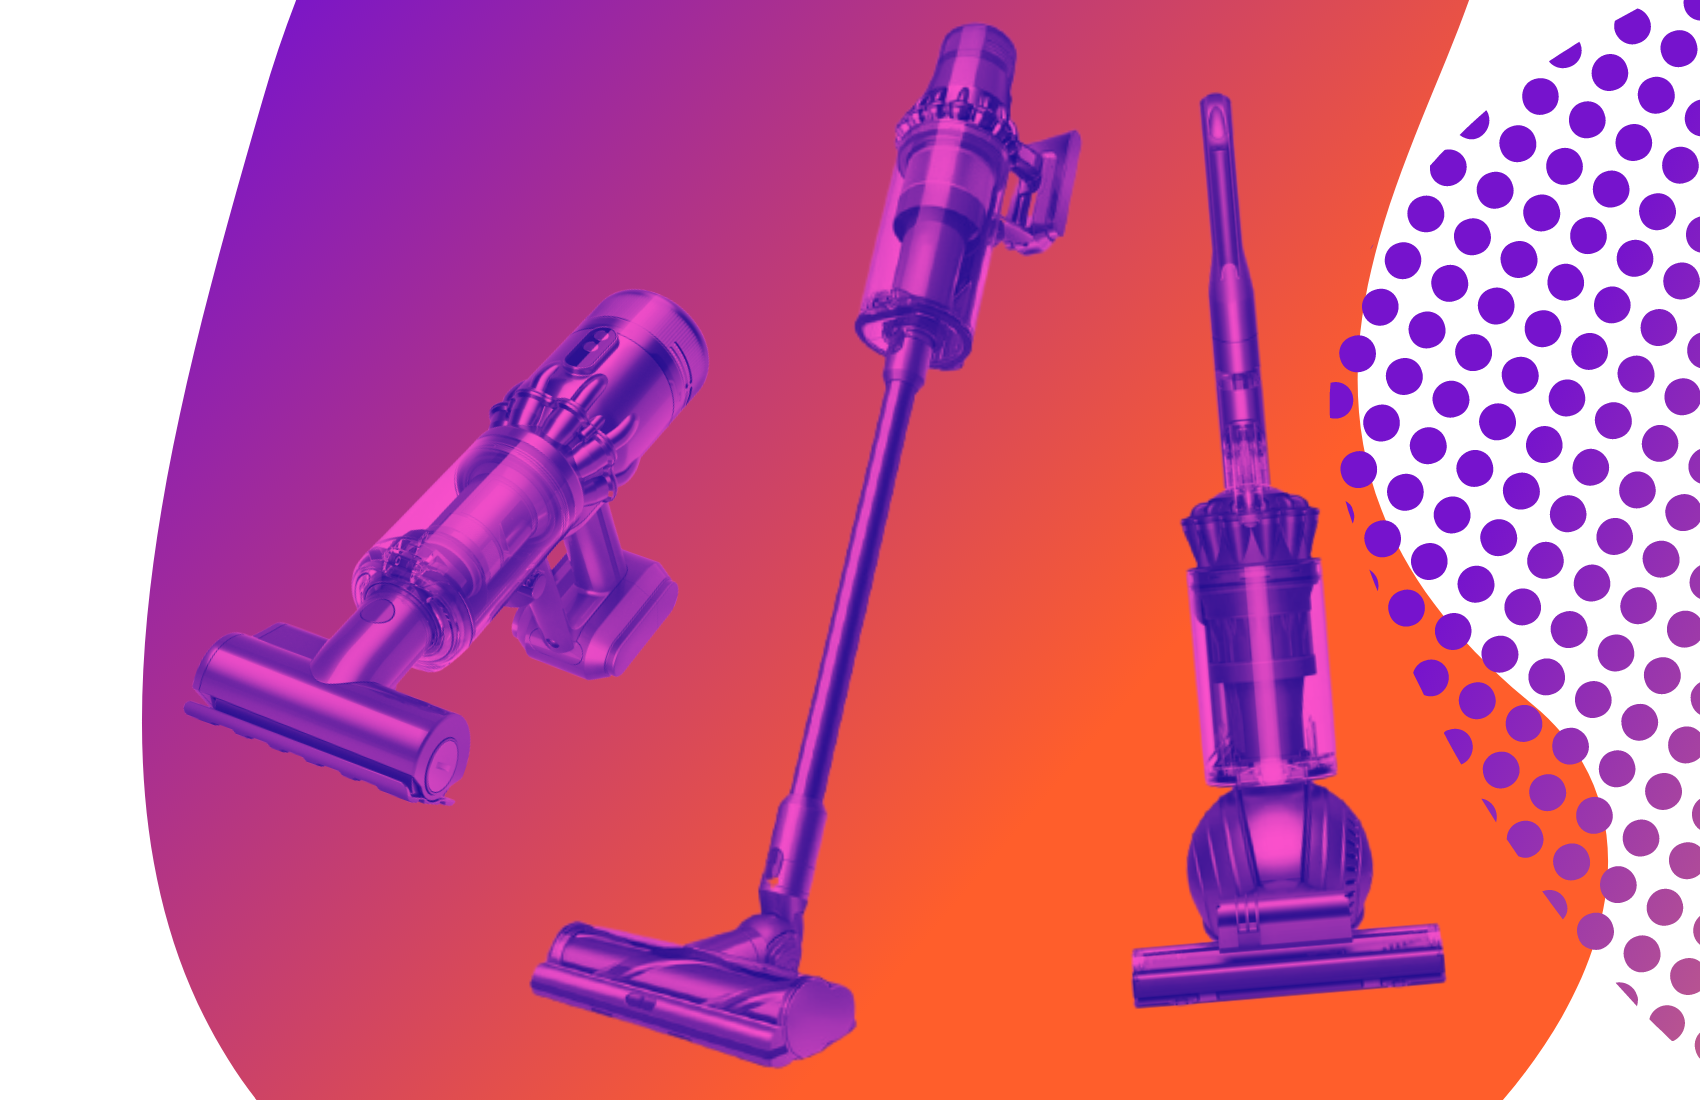 Dyson Humdinger, V11, and Ball Animal 2 vacuums with purple tint on colorful graphic design